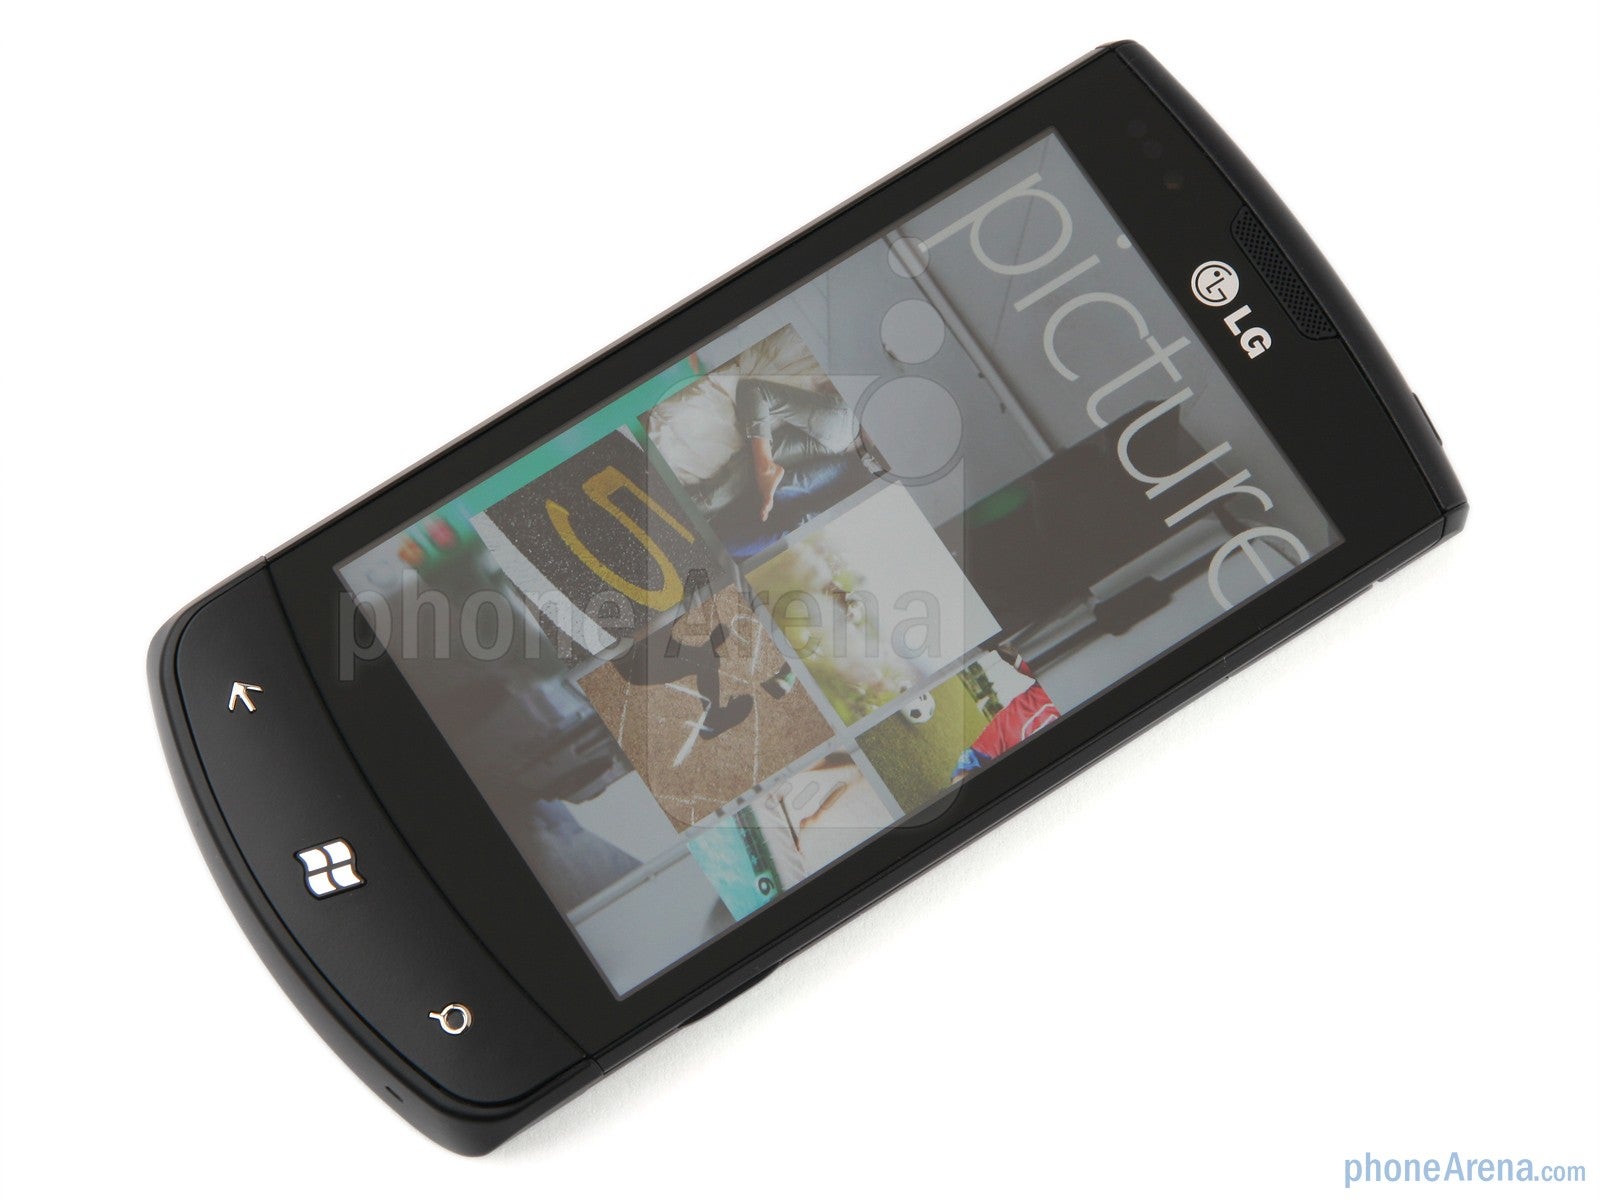 The LG Optimus 7 offers a 3.8-inch screen - LG Optimus 7 Review